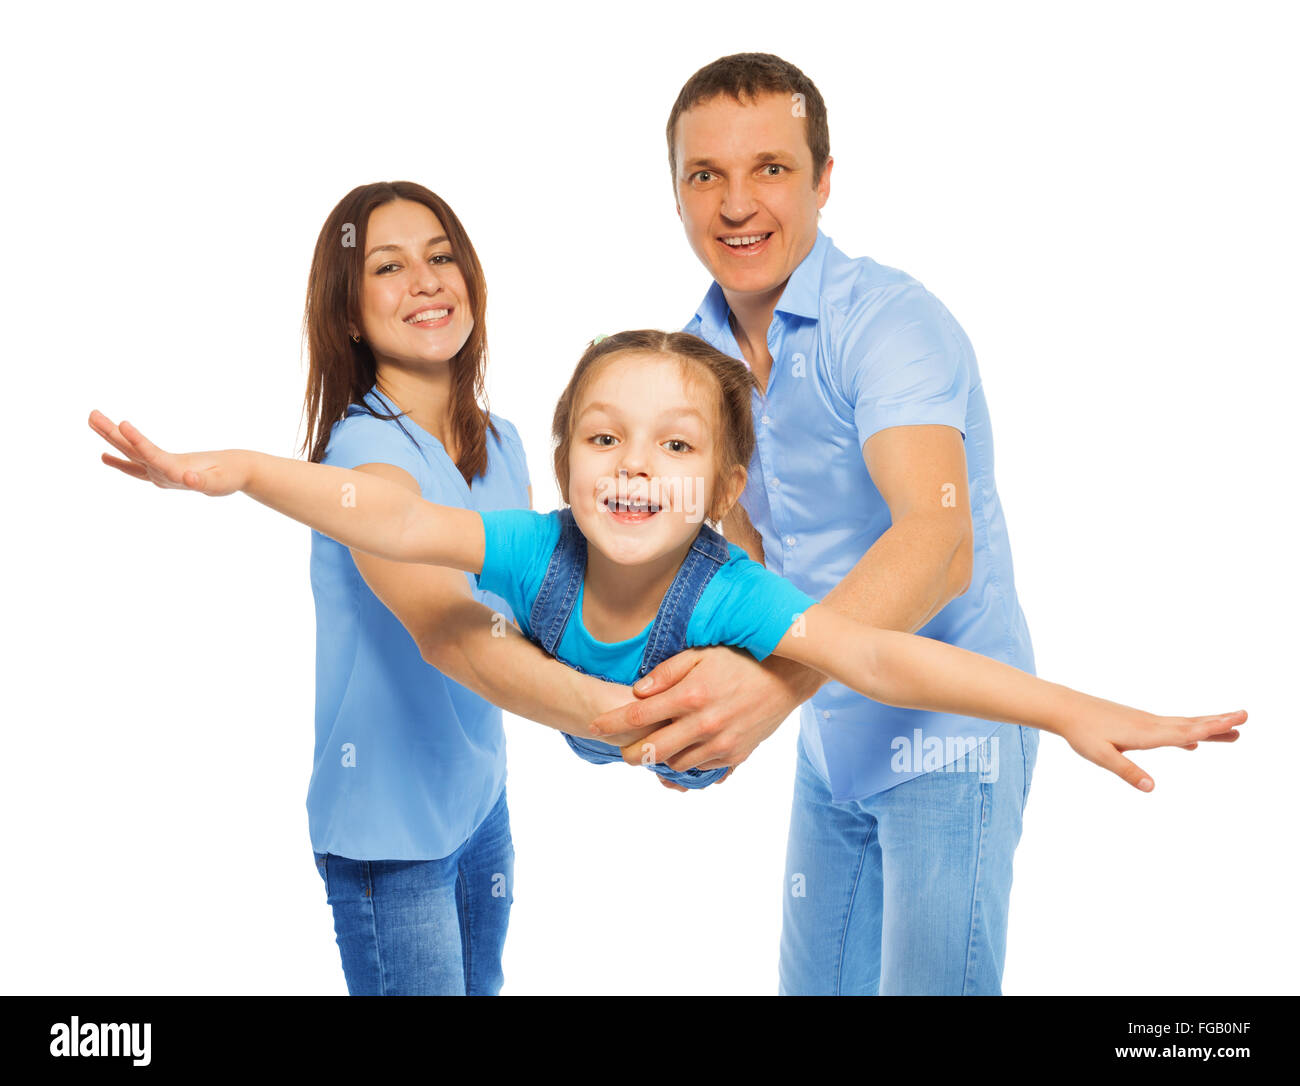 Girl like little plane flying from parents hands Stock Photo